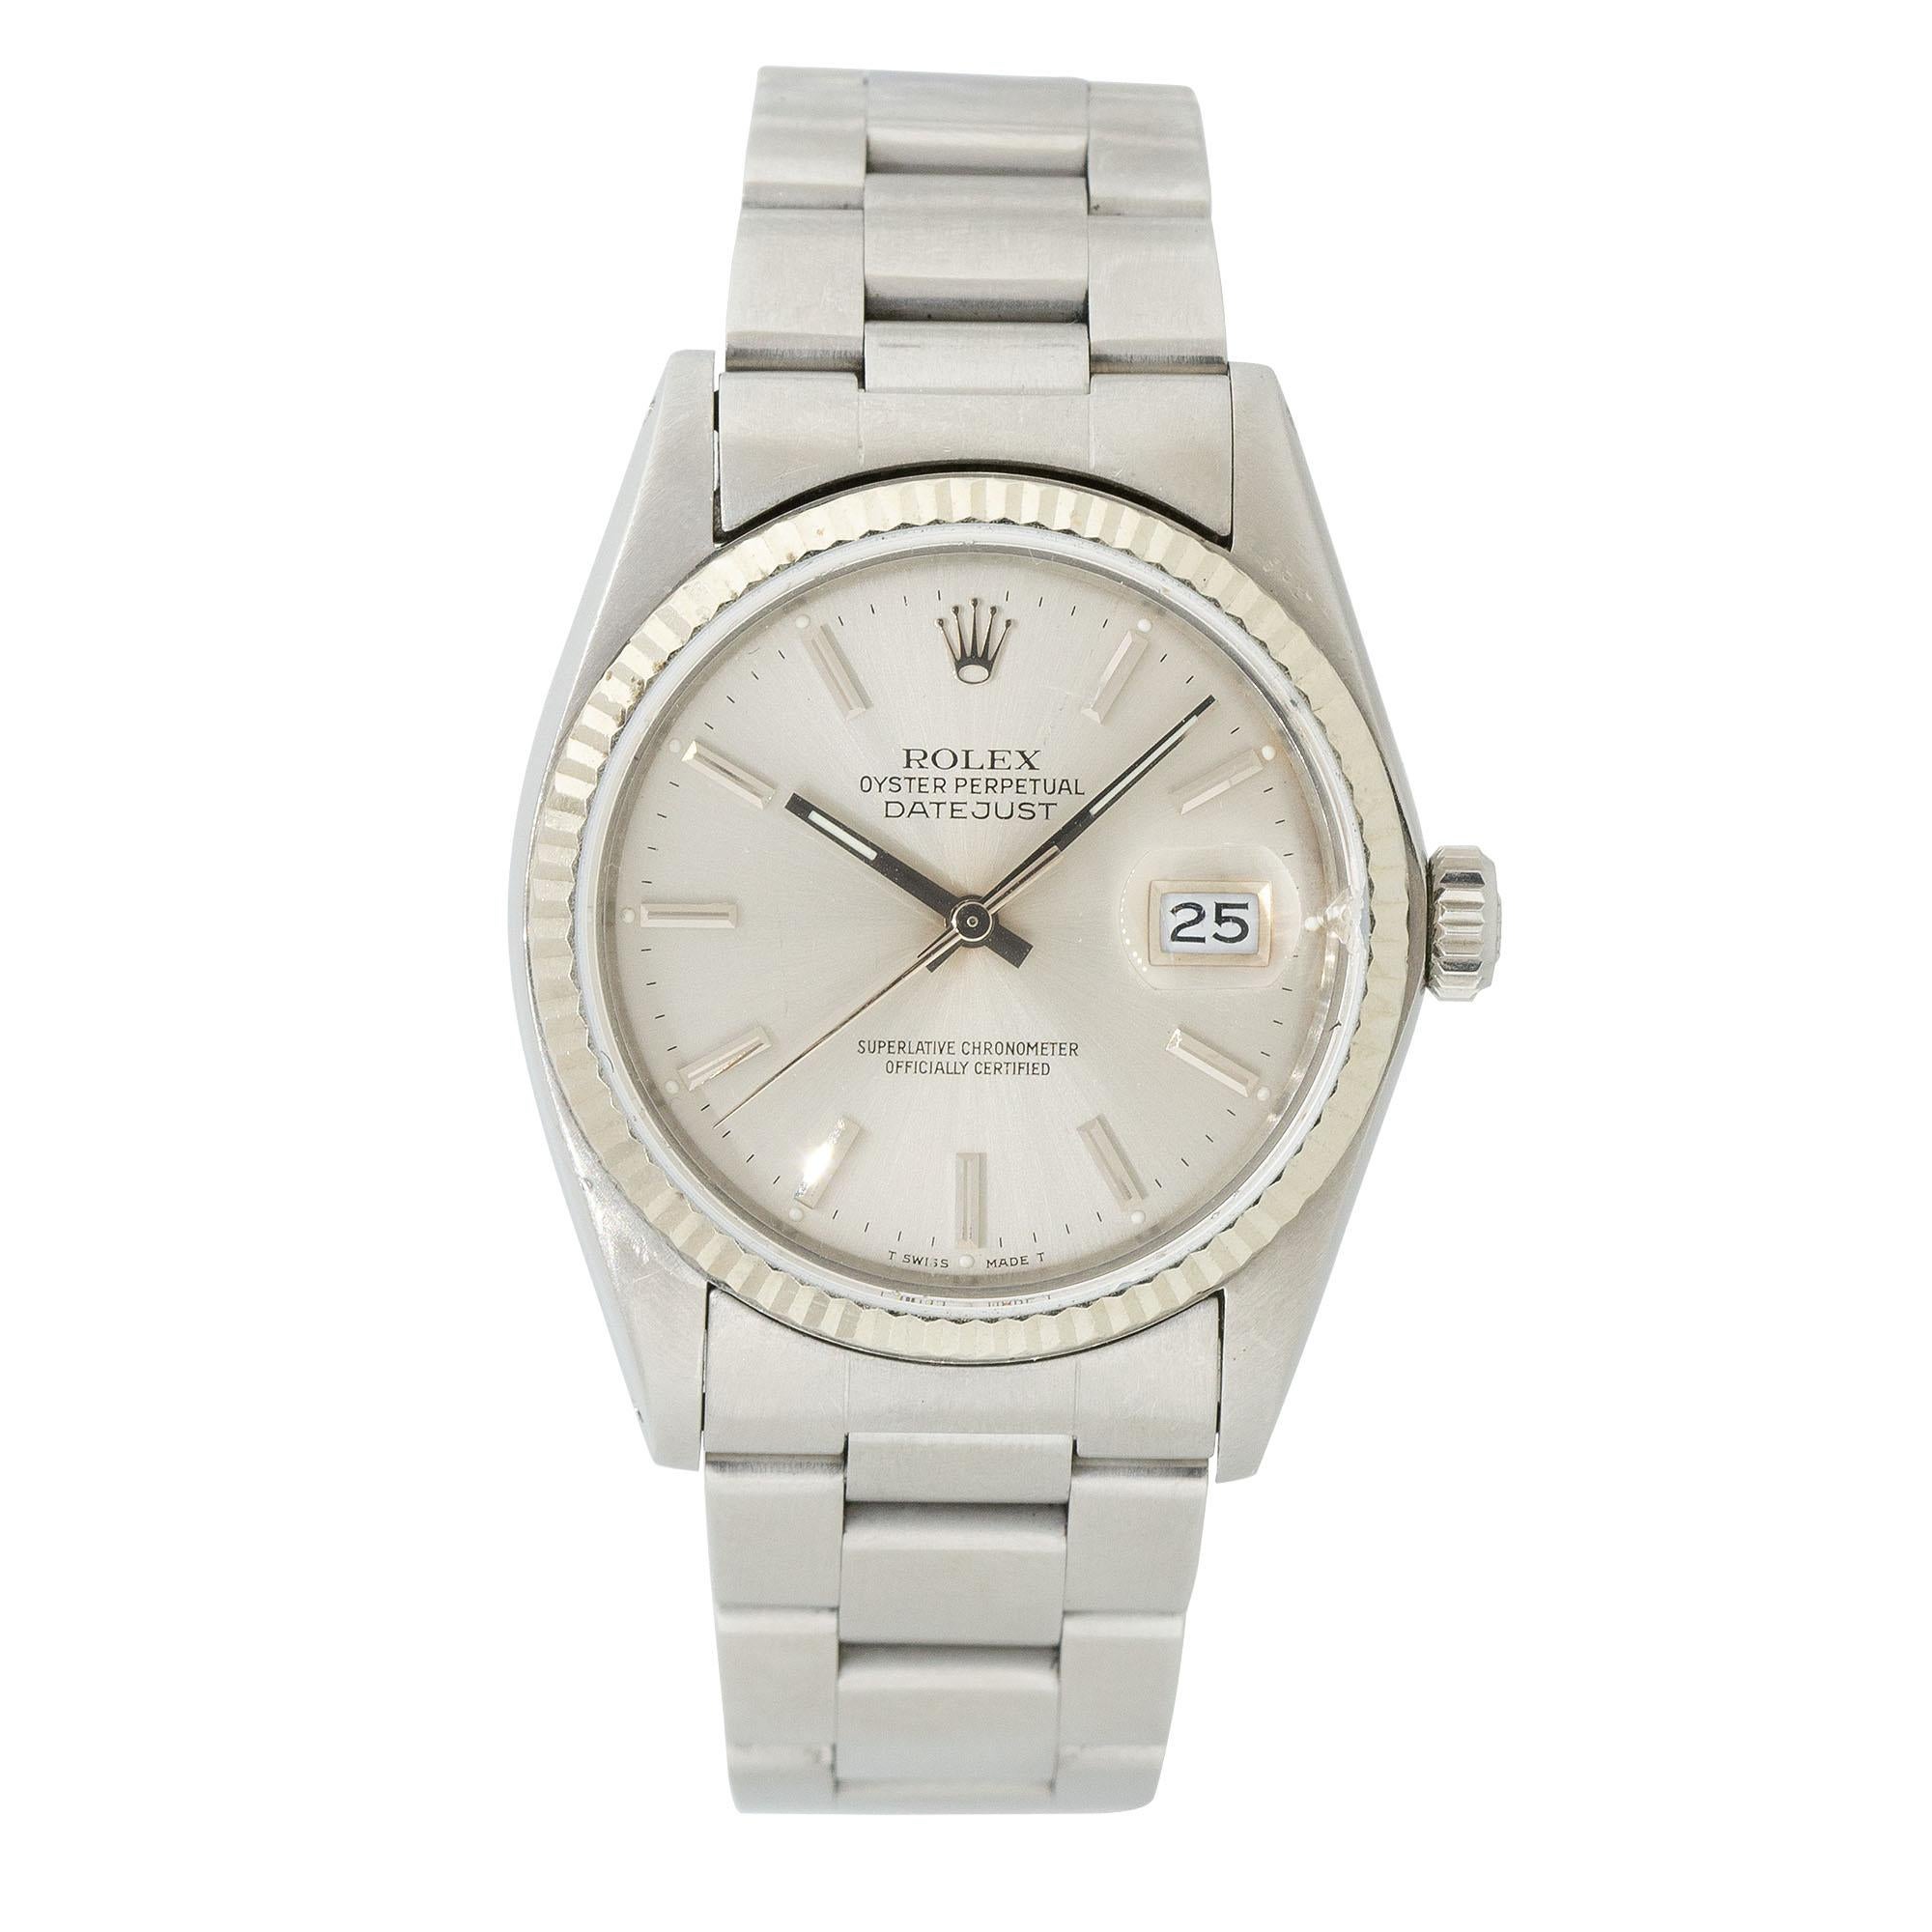 Rolex 16030 Datejust Stainless Steel 36mm Silver Dial Watch
The Rolex 16030 Datejust is a classic and iconic stainless steel wristwatch with a 36mm case size. It features a silver dial, which gives it an elegant and timeless appearance. The watch is